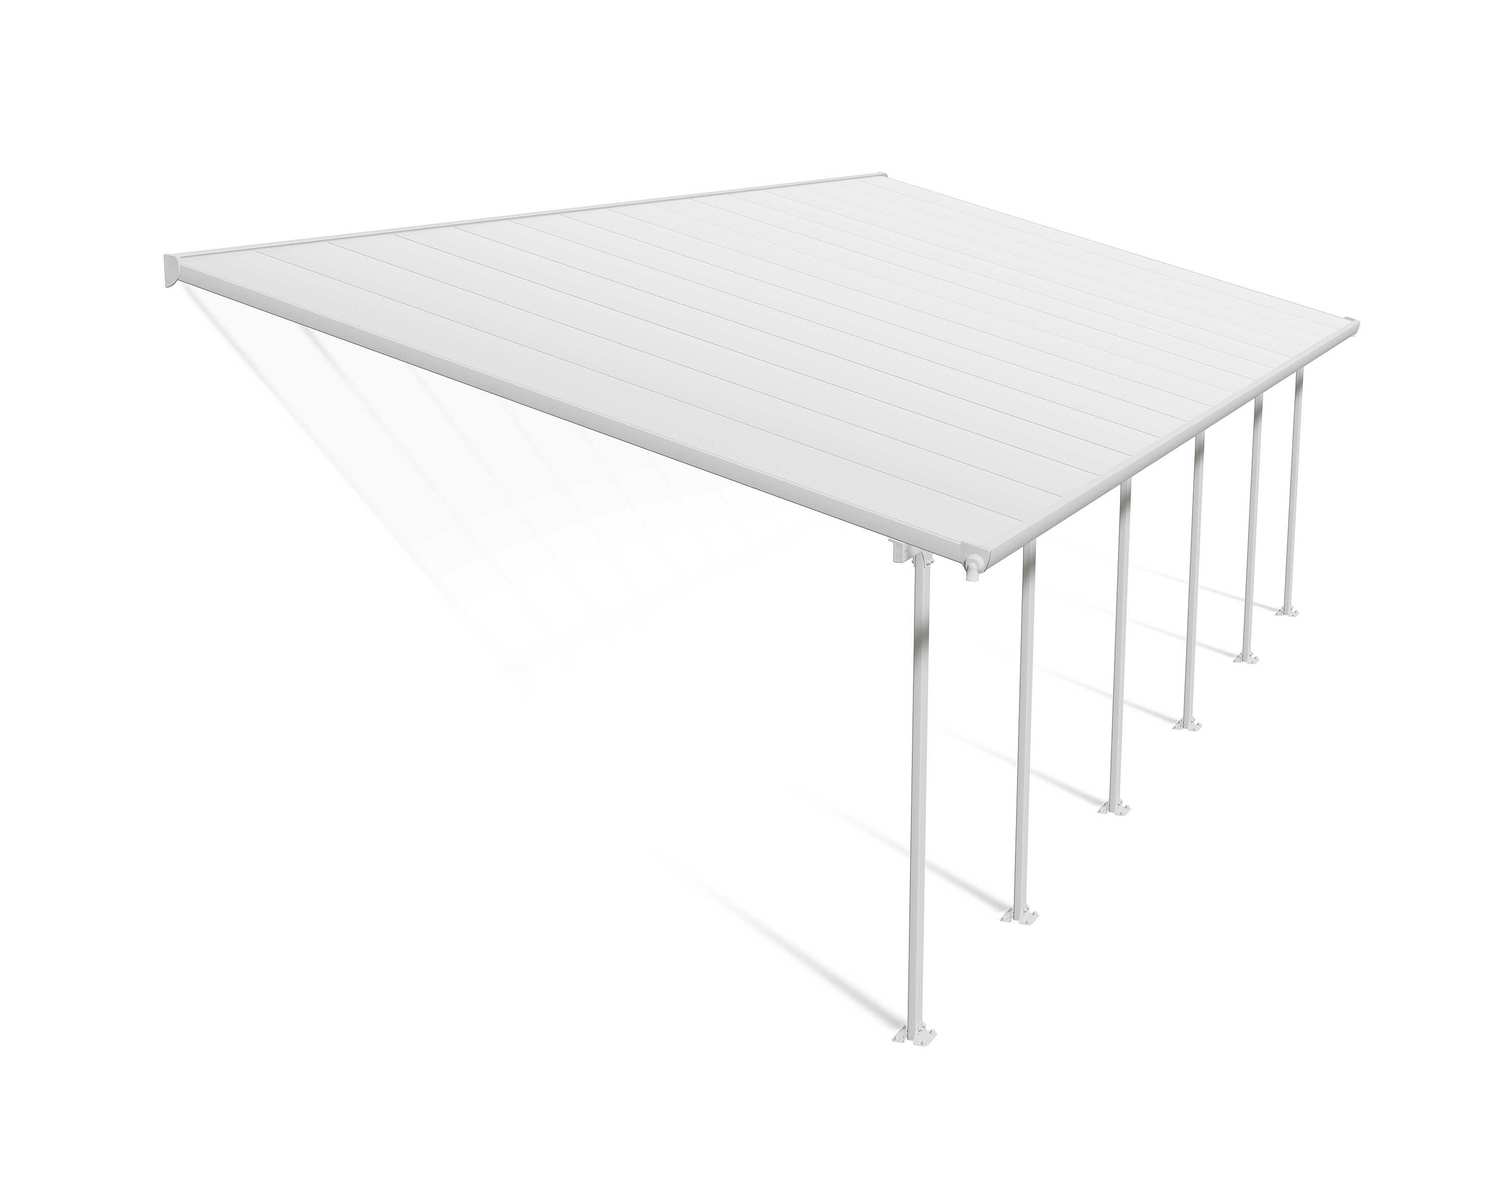 Feria 13 ft. x 34 ft. White Aluminium Patio Cover With 6 Posts, White Twin-Wall Polycarbonate Roof Panels.